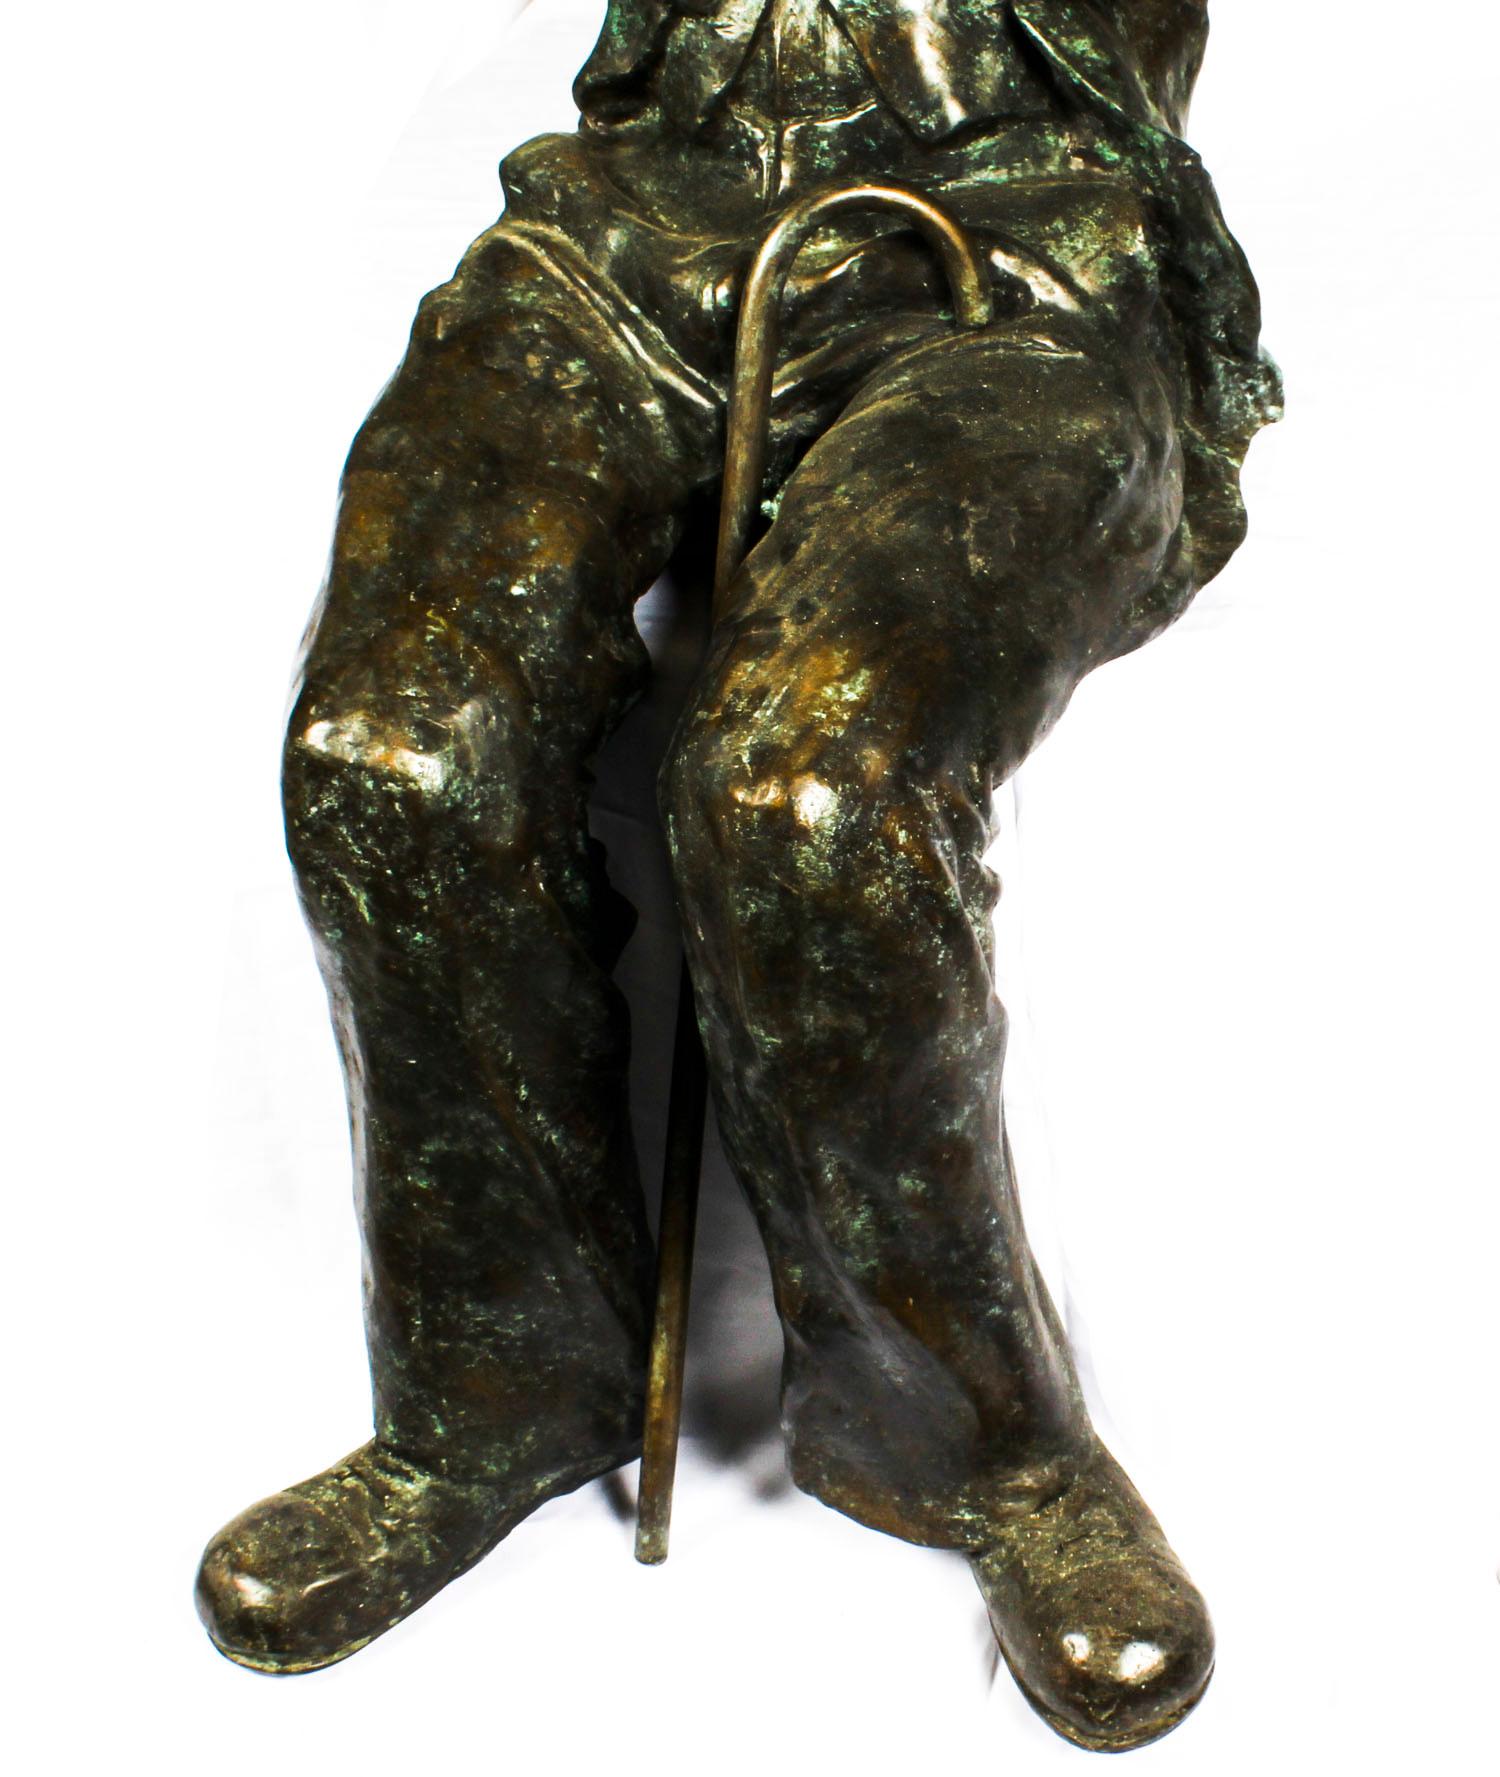 Vintage Lifesize Bronze Sculpture of Seated Charlie Chaplin 20th Century For Sale 6